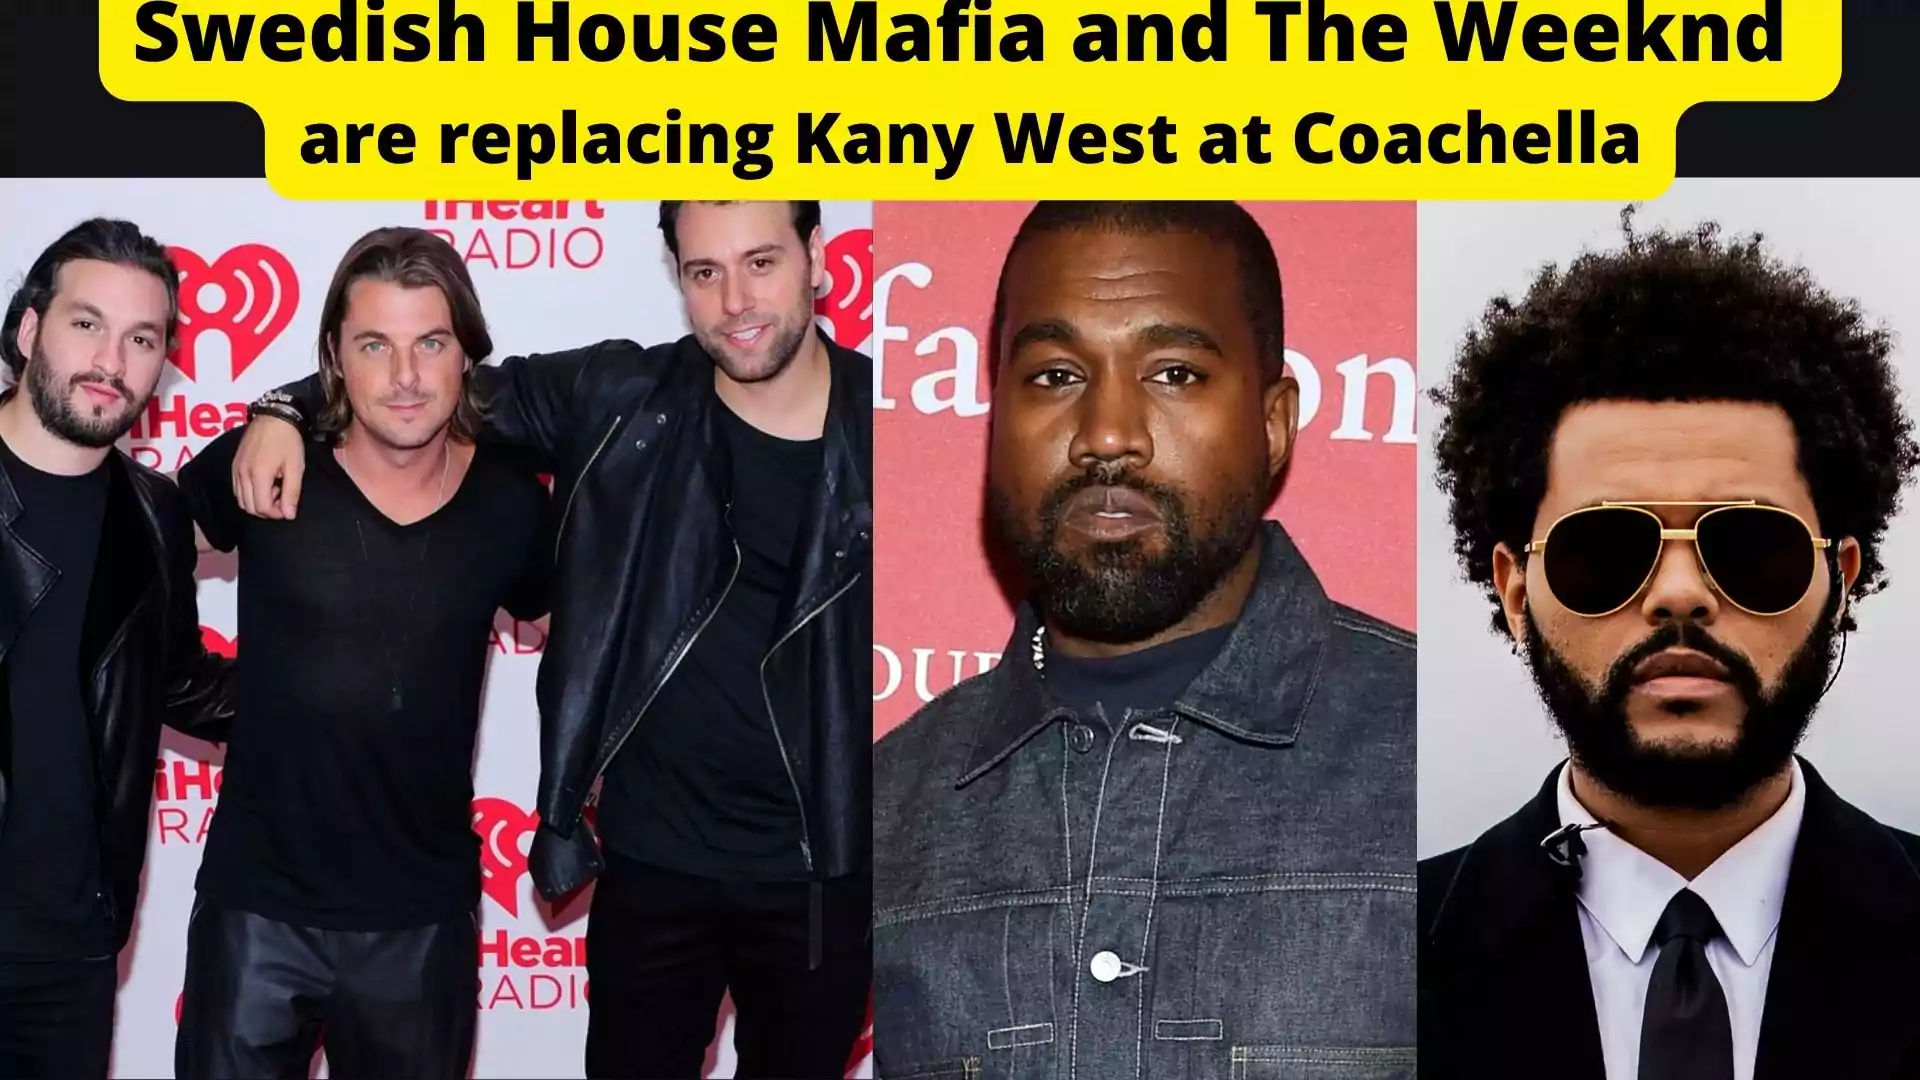 Swedish House Mafia and The Weeknd are replacing Kany West at Coachella wallpaper and images